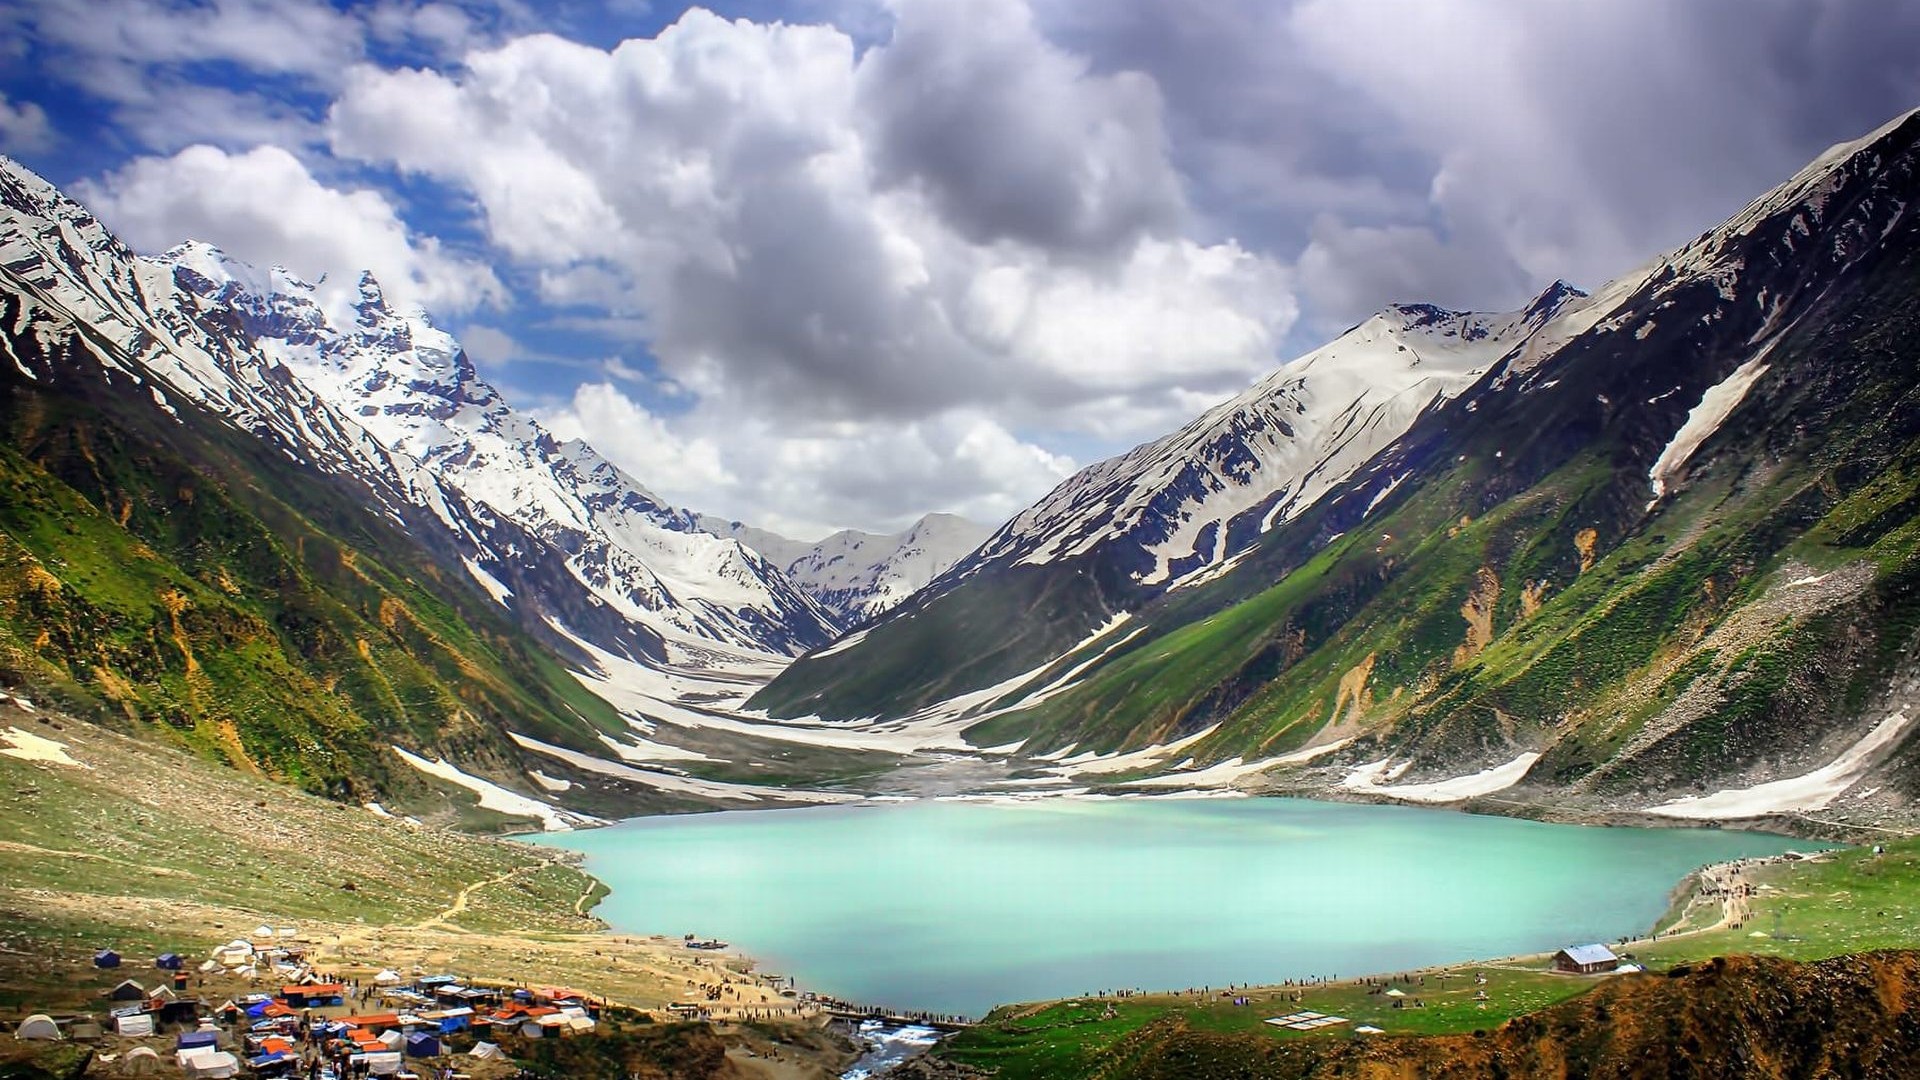 Light blue lake with snow capped mountains infront of it on a cloudy day